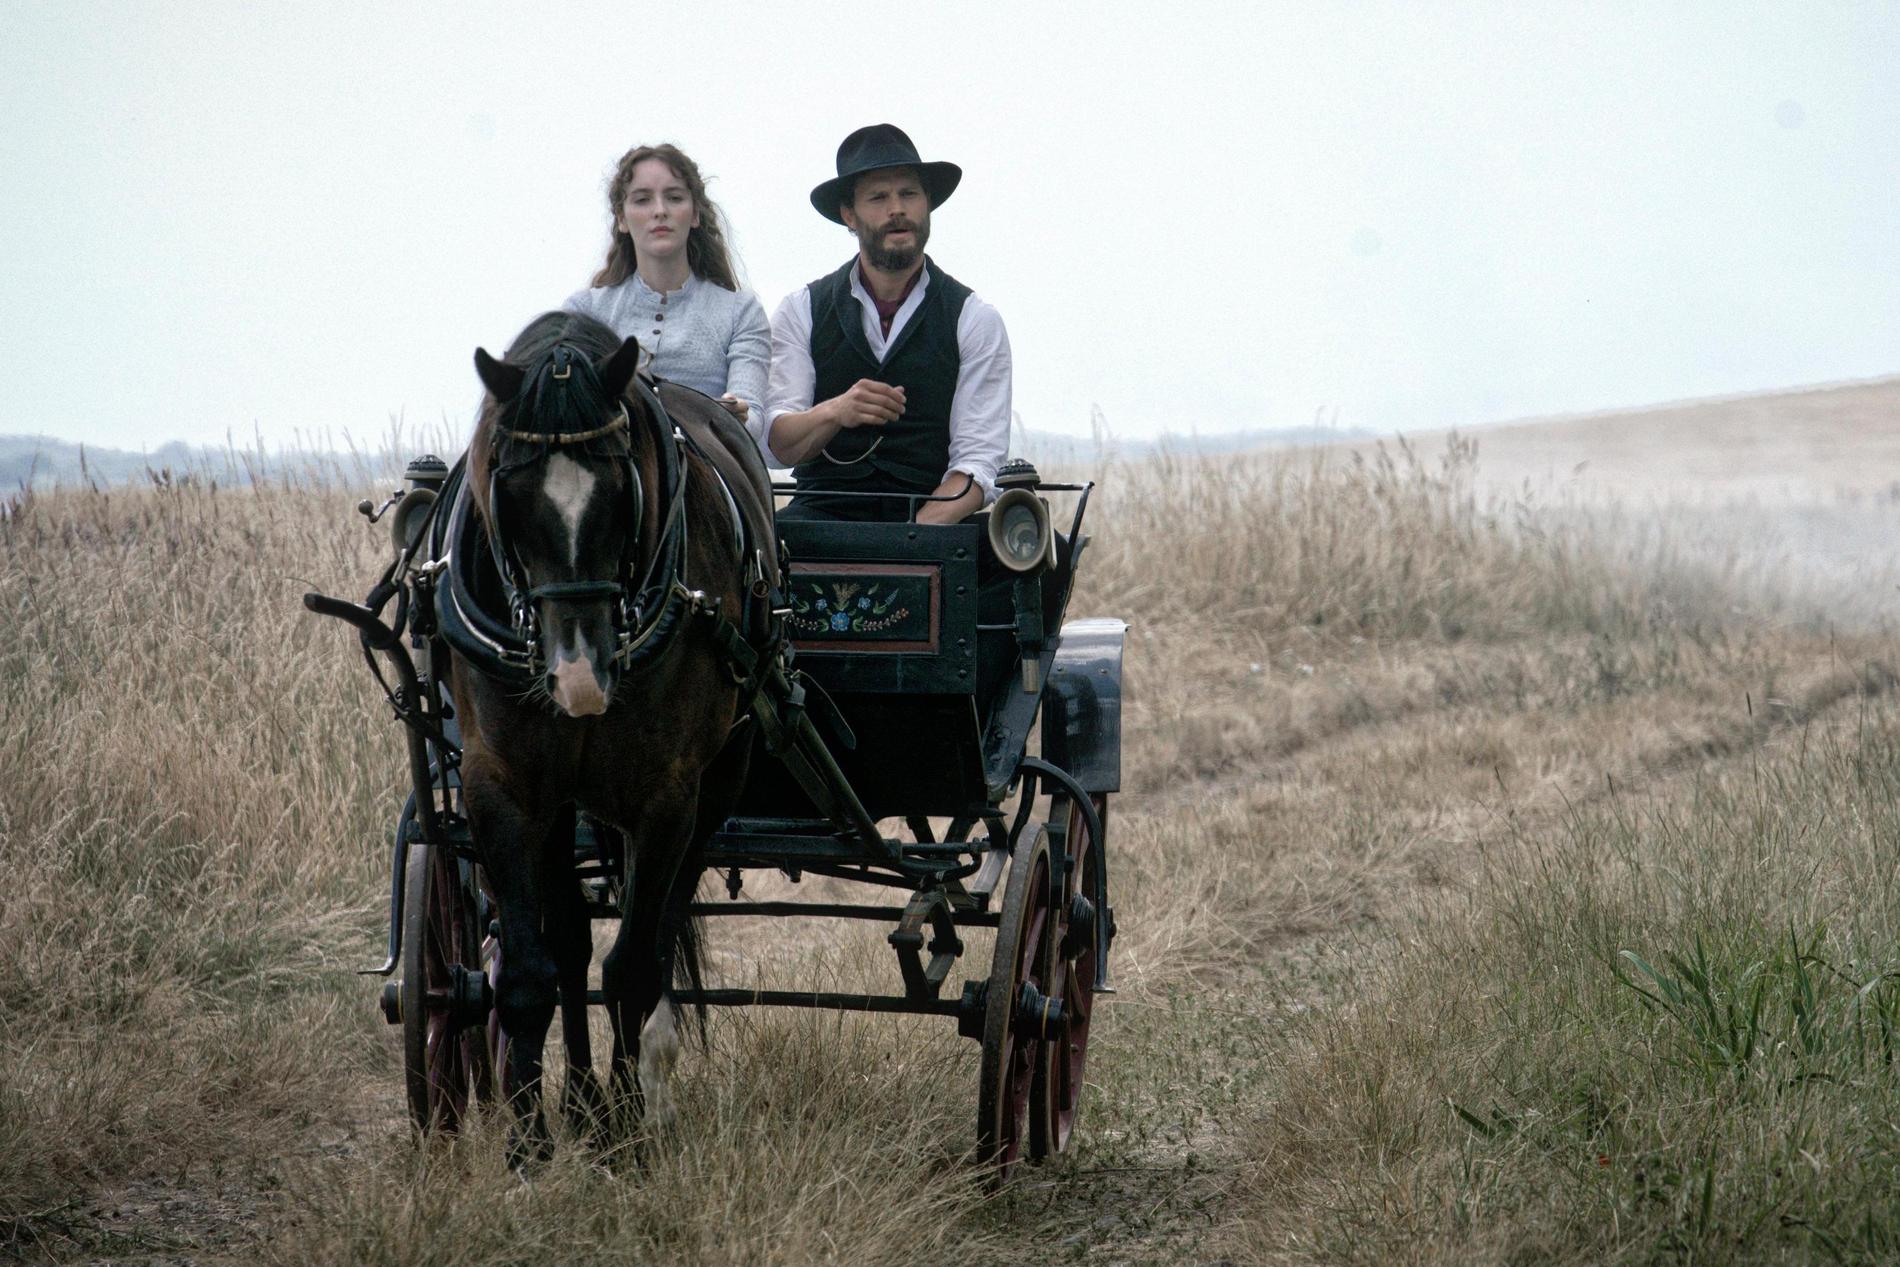 ”Death and nightingales”.